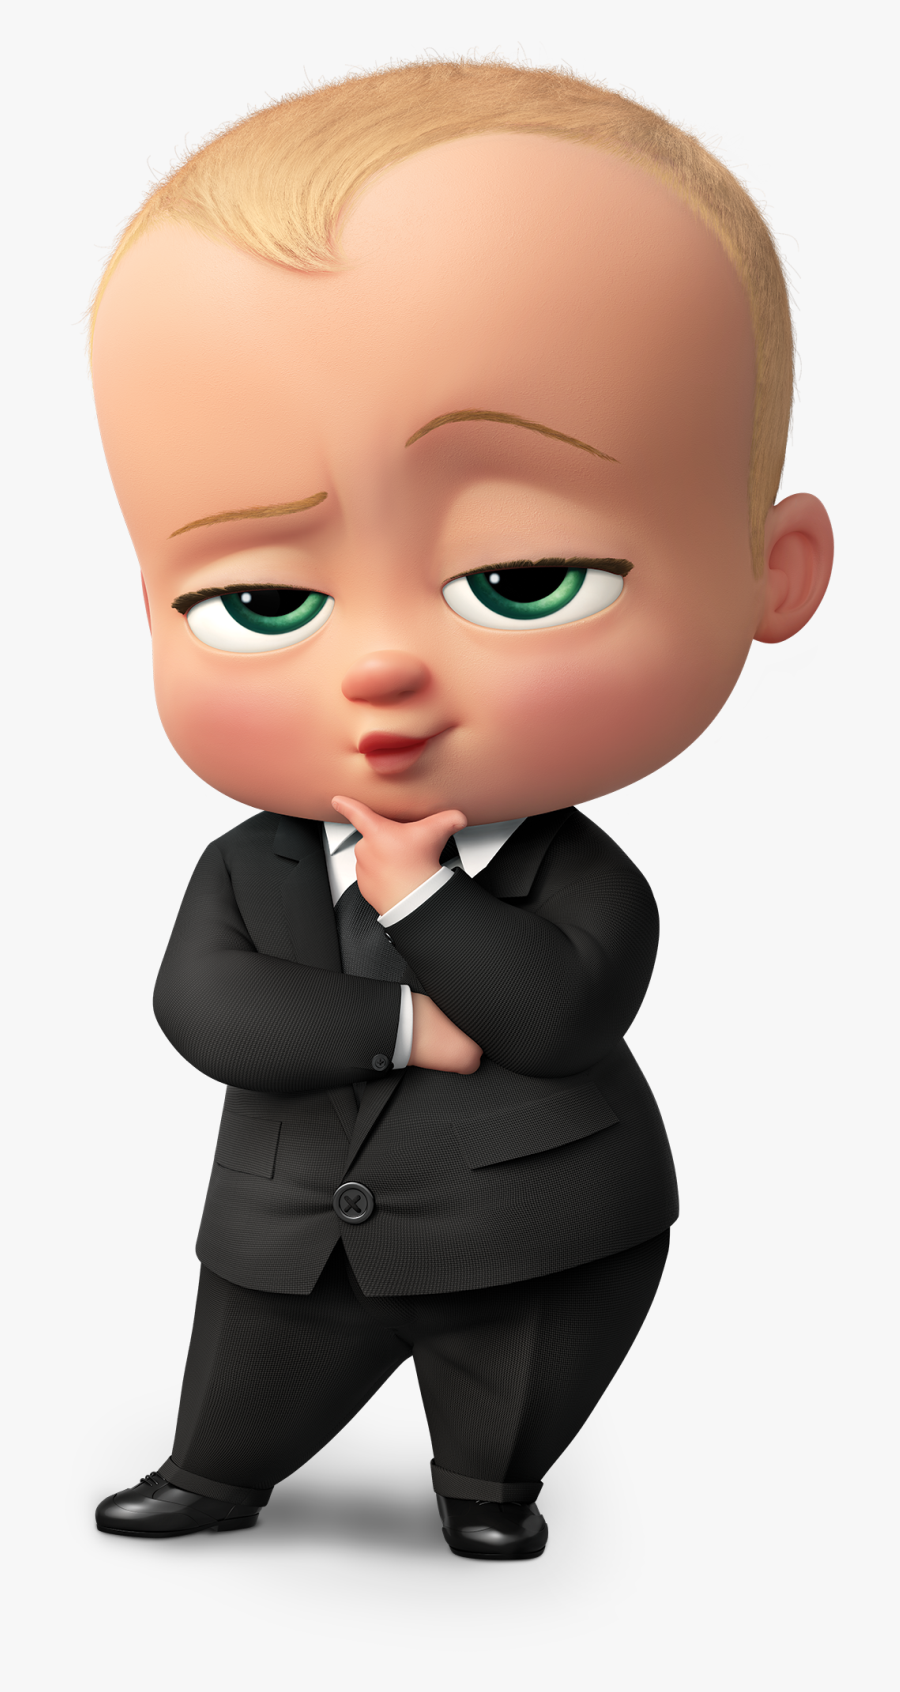 Thumb Image - Boss Baby Cut Out, Transparent Clipart